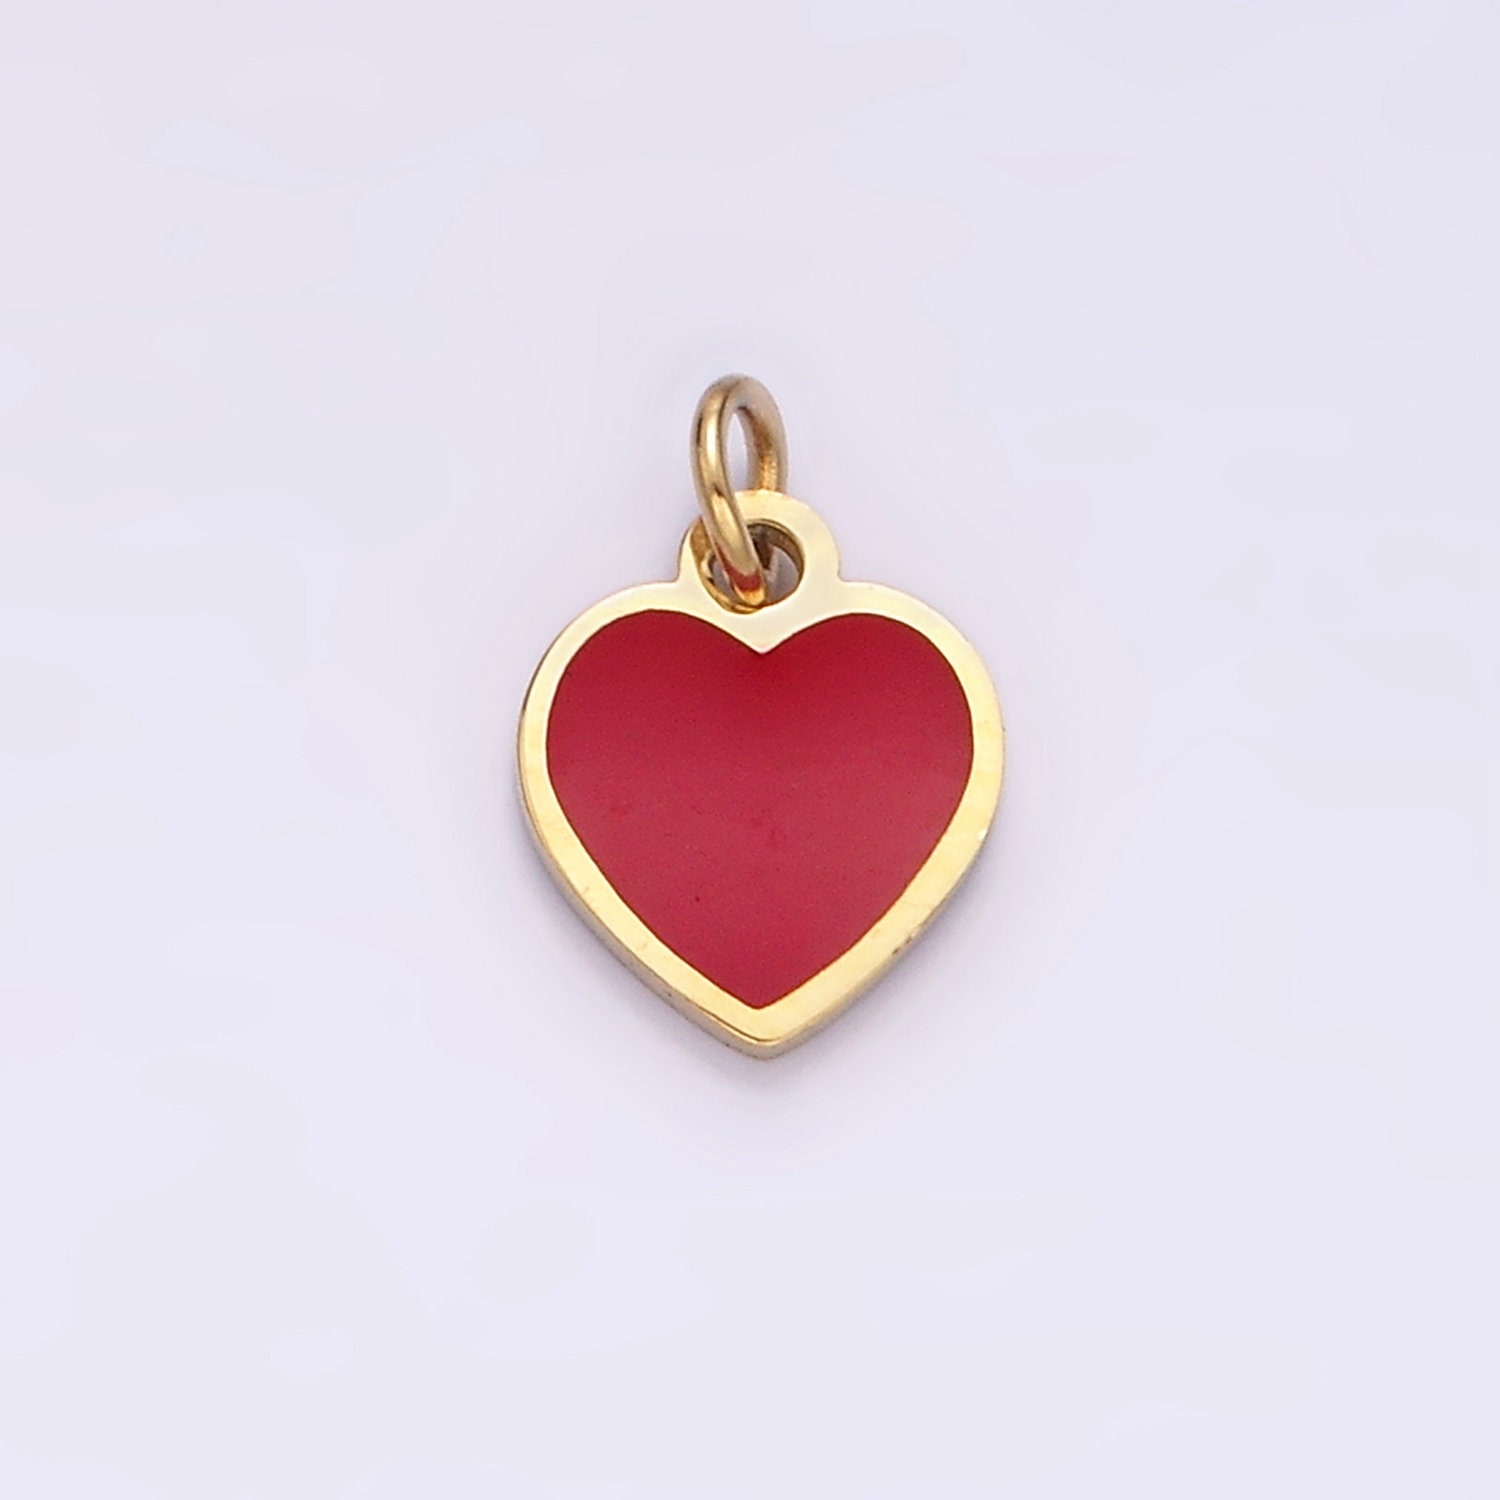 Noverlife 96pcs Valentine's Day Enamel Heart Charms for Jewelry Making, Gold Plated Enamel Jewelry Making Charms, Bracelet Charms Enamel Pendants